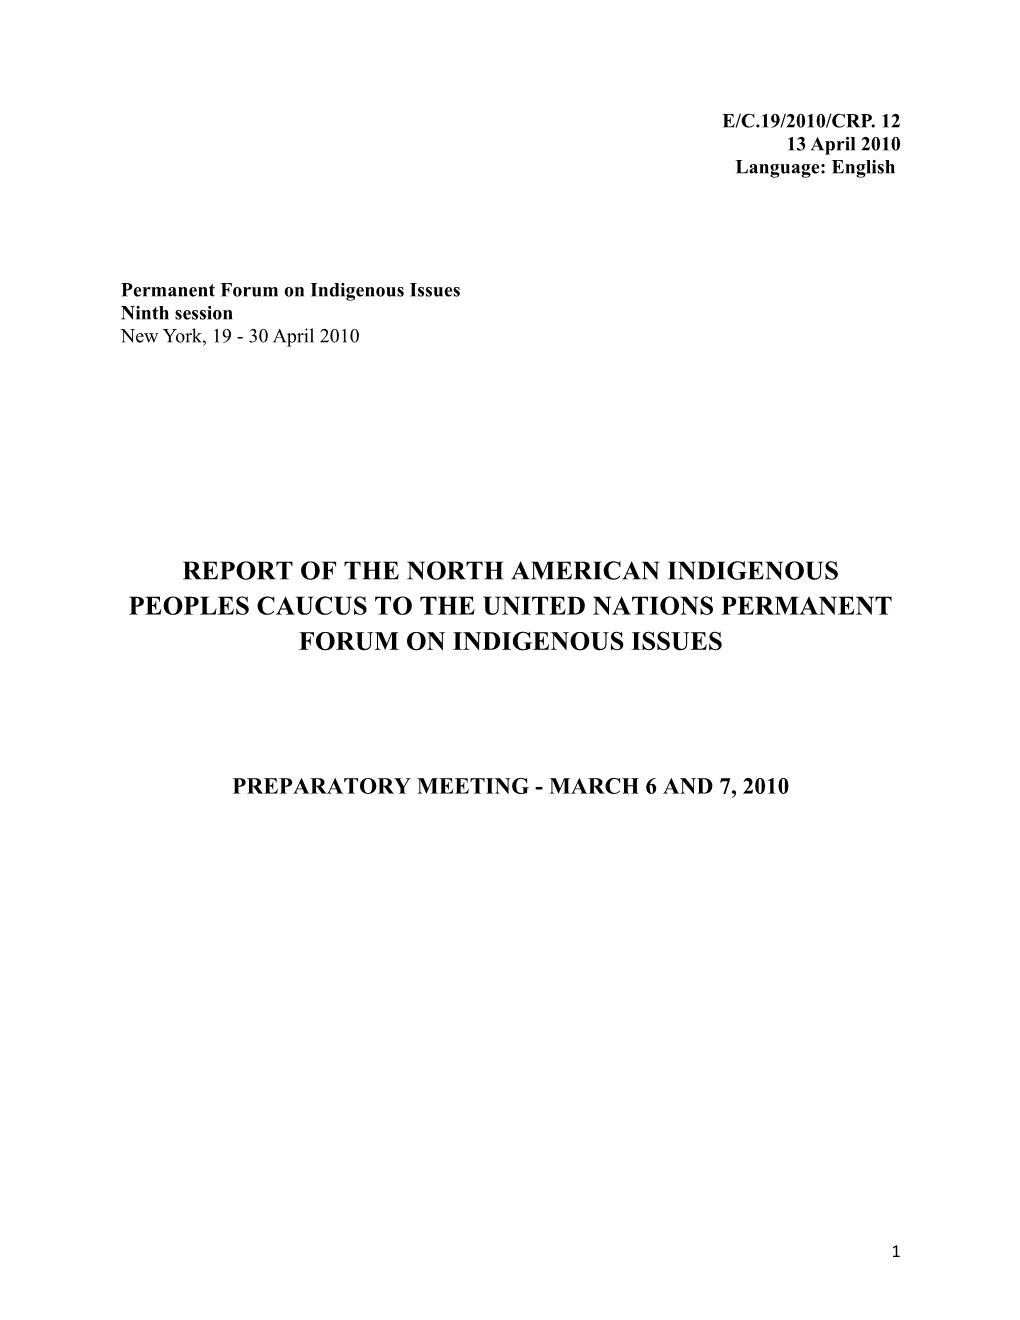 Report of the North American Indigenous Peoples Caucus to the United Nations Permanent